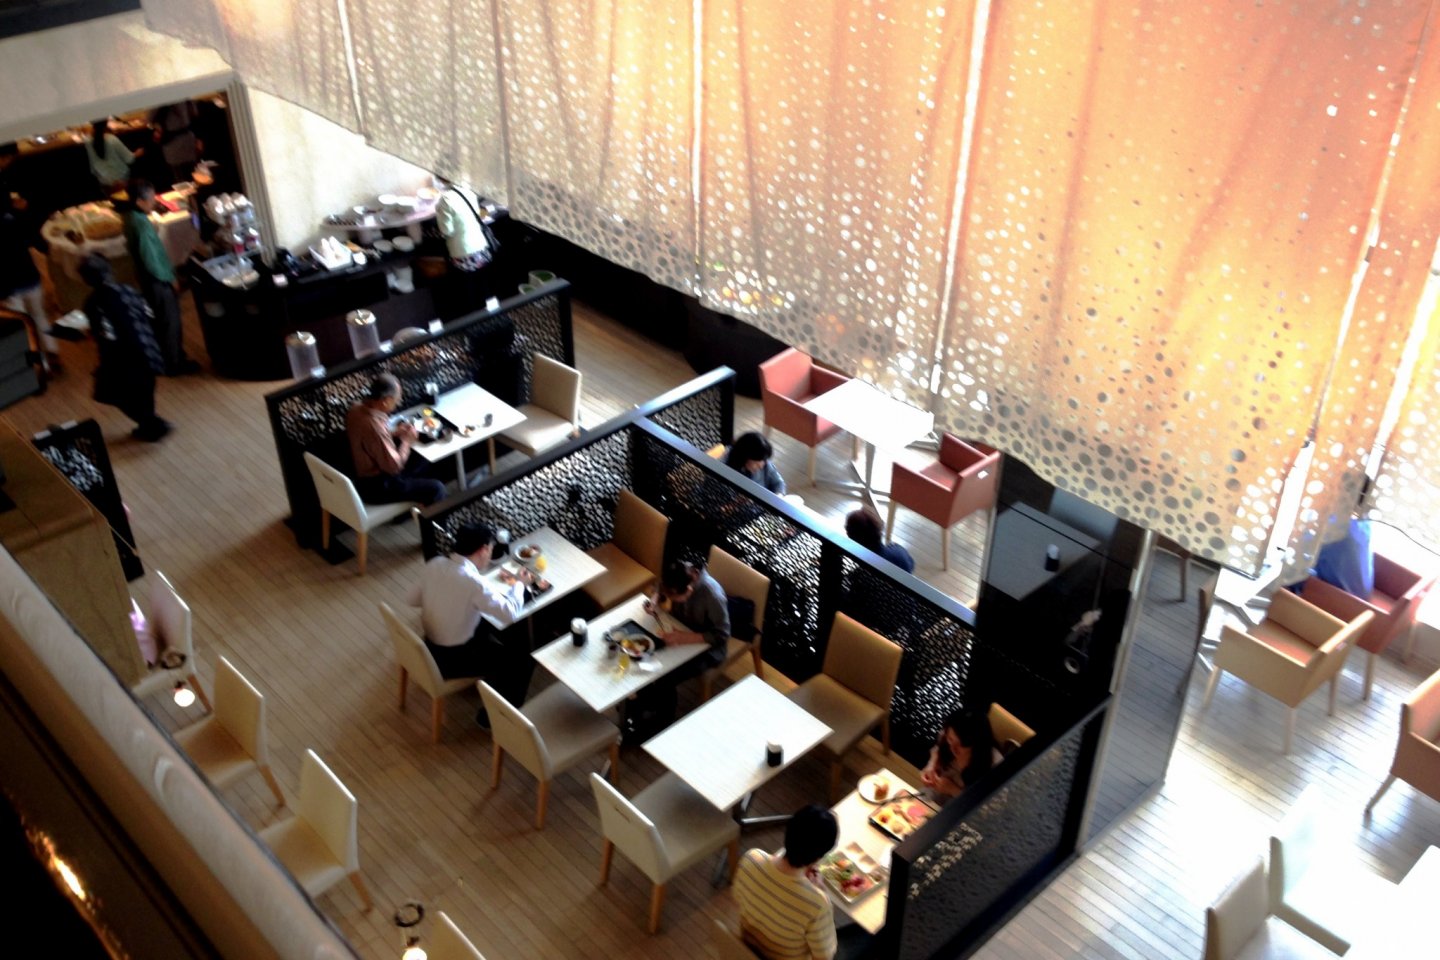 Restaurant Cuore is the place to be for breakfast, lunch and dinner at Hotel Metropolitan Akita.